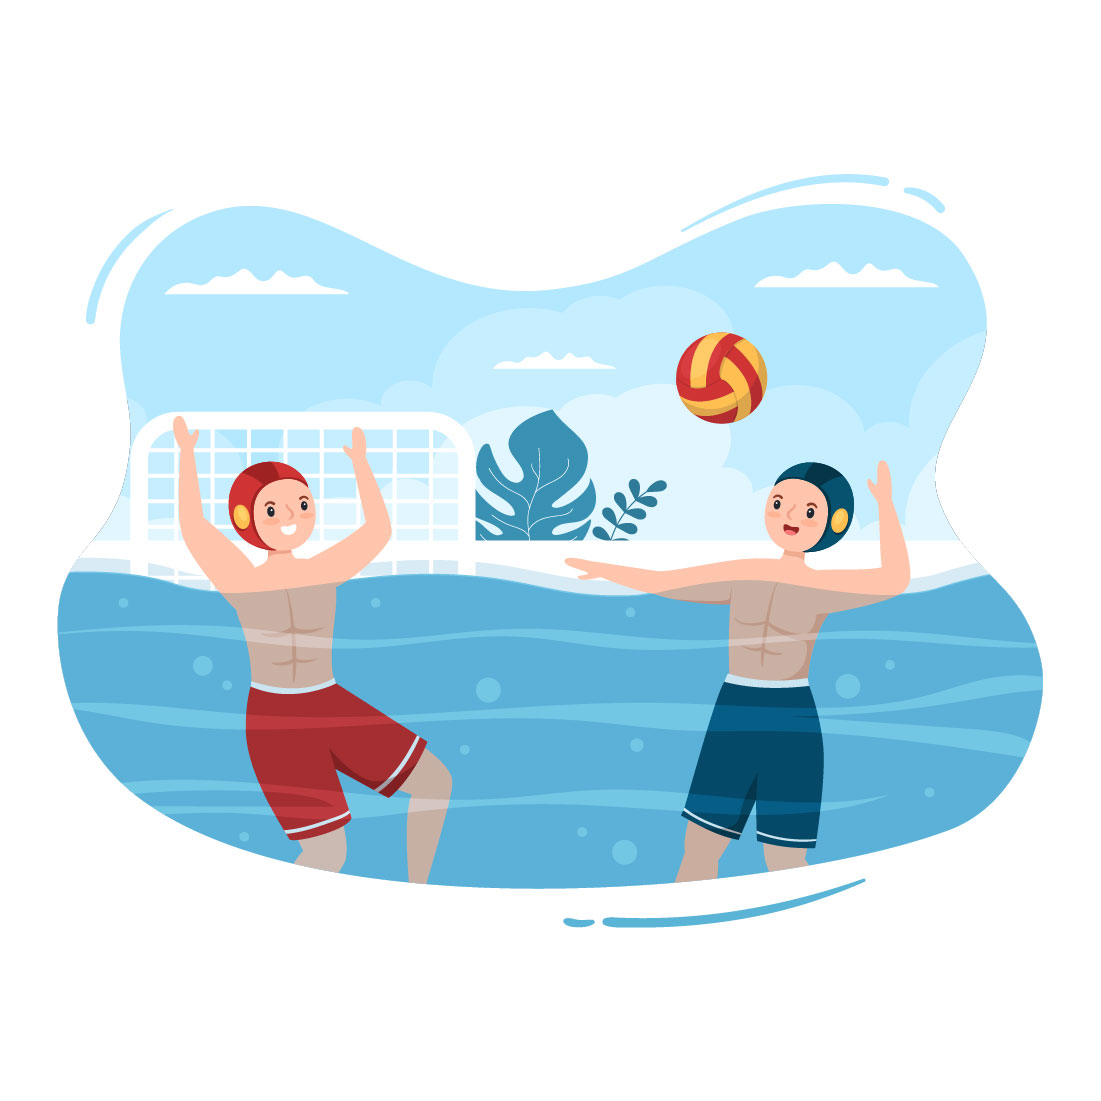 water polo player clipart flowers